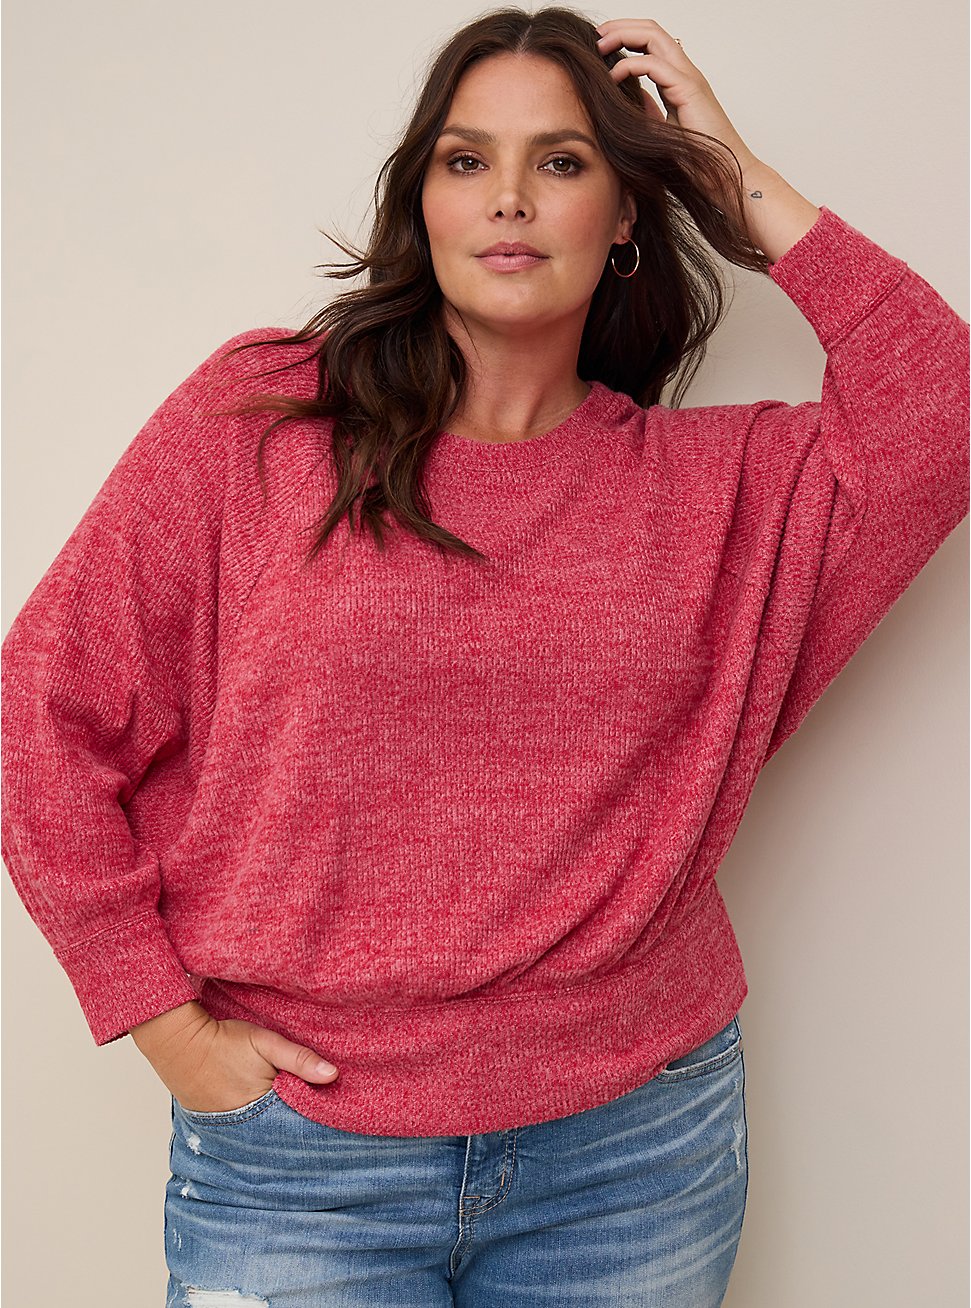 Relaxed Fit Super Soft Plush Rib Crew Neck Batwing Sweatshirt, RED, hi-res